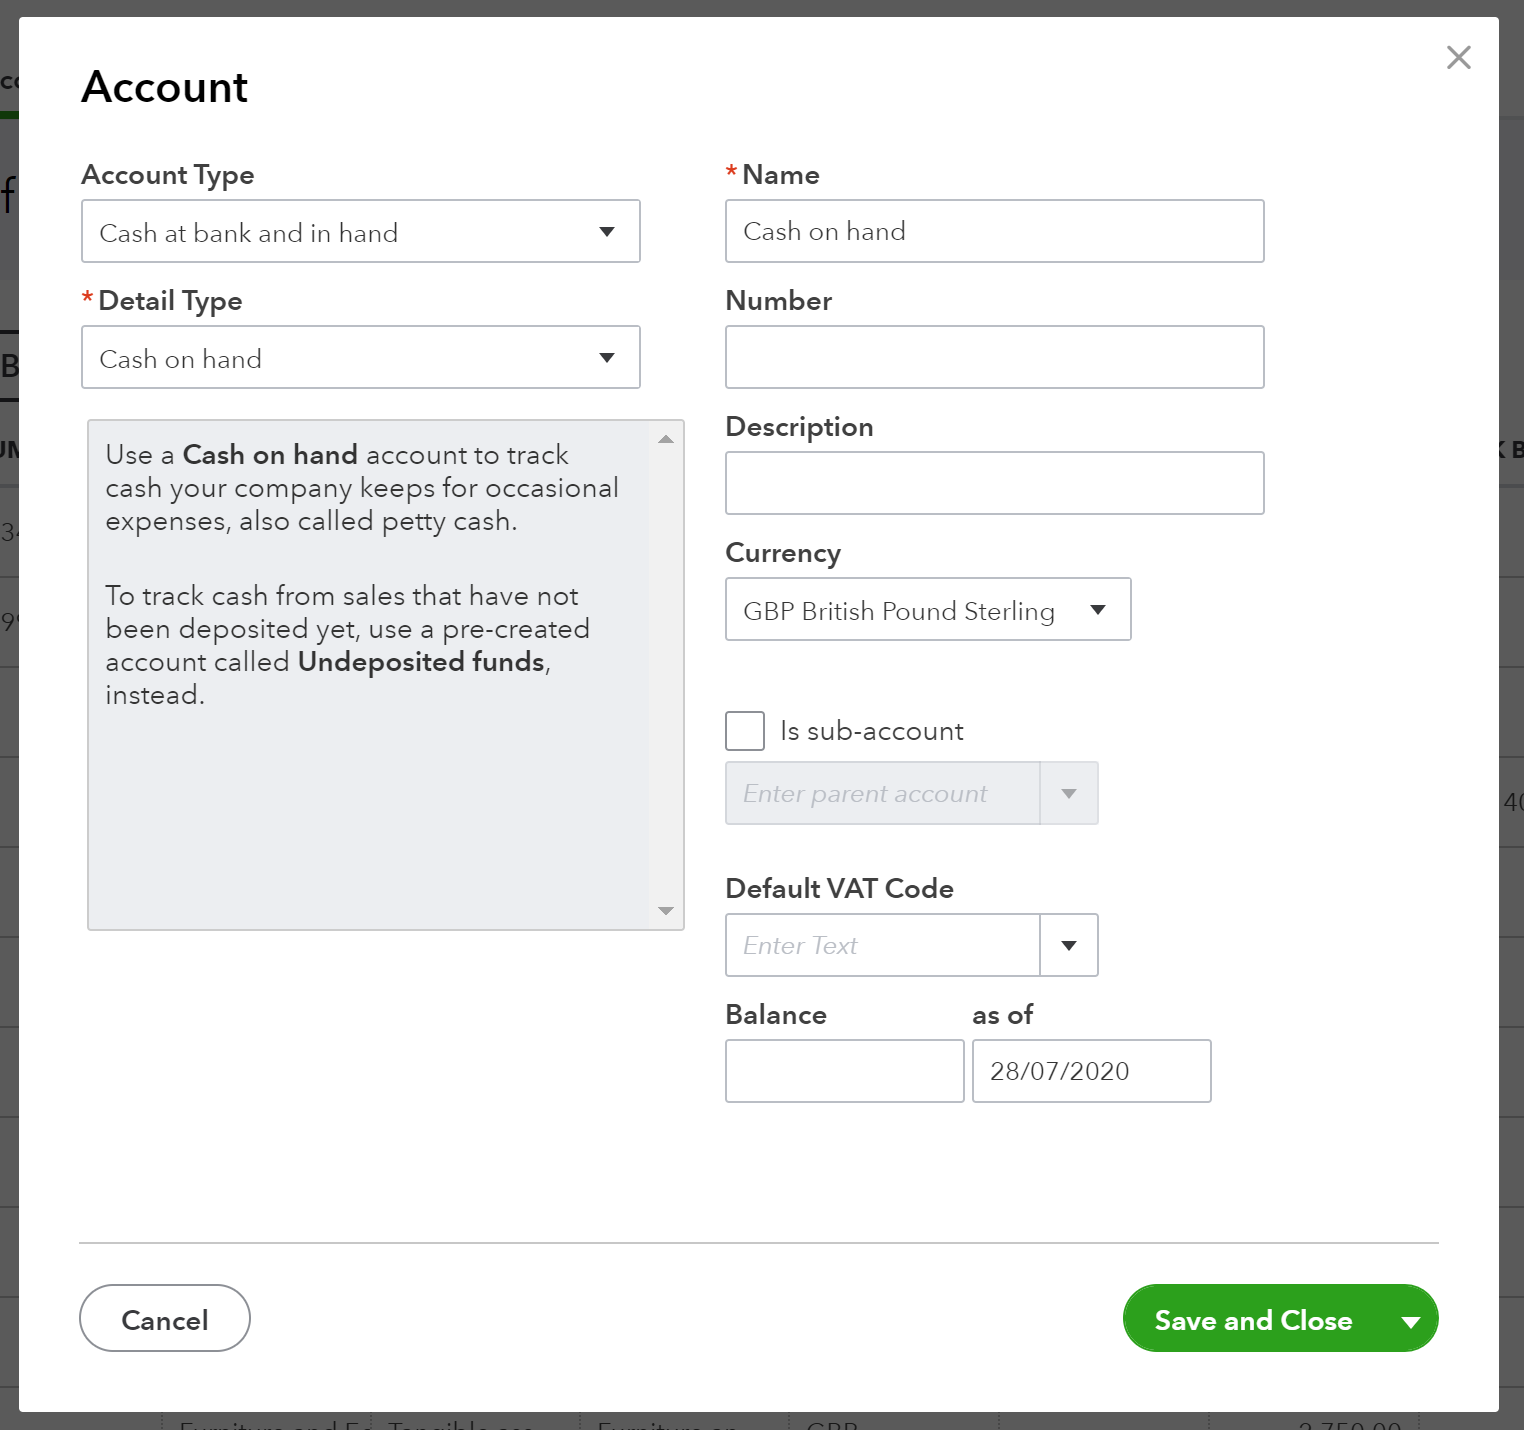 Account settings screen for payment accounts in QBO